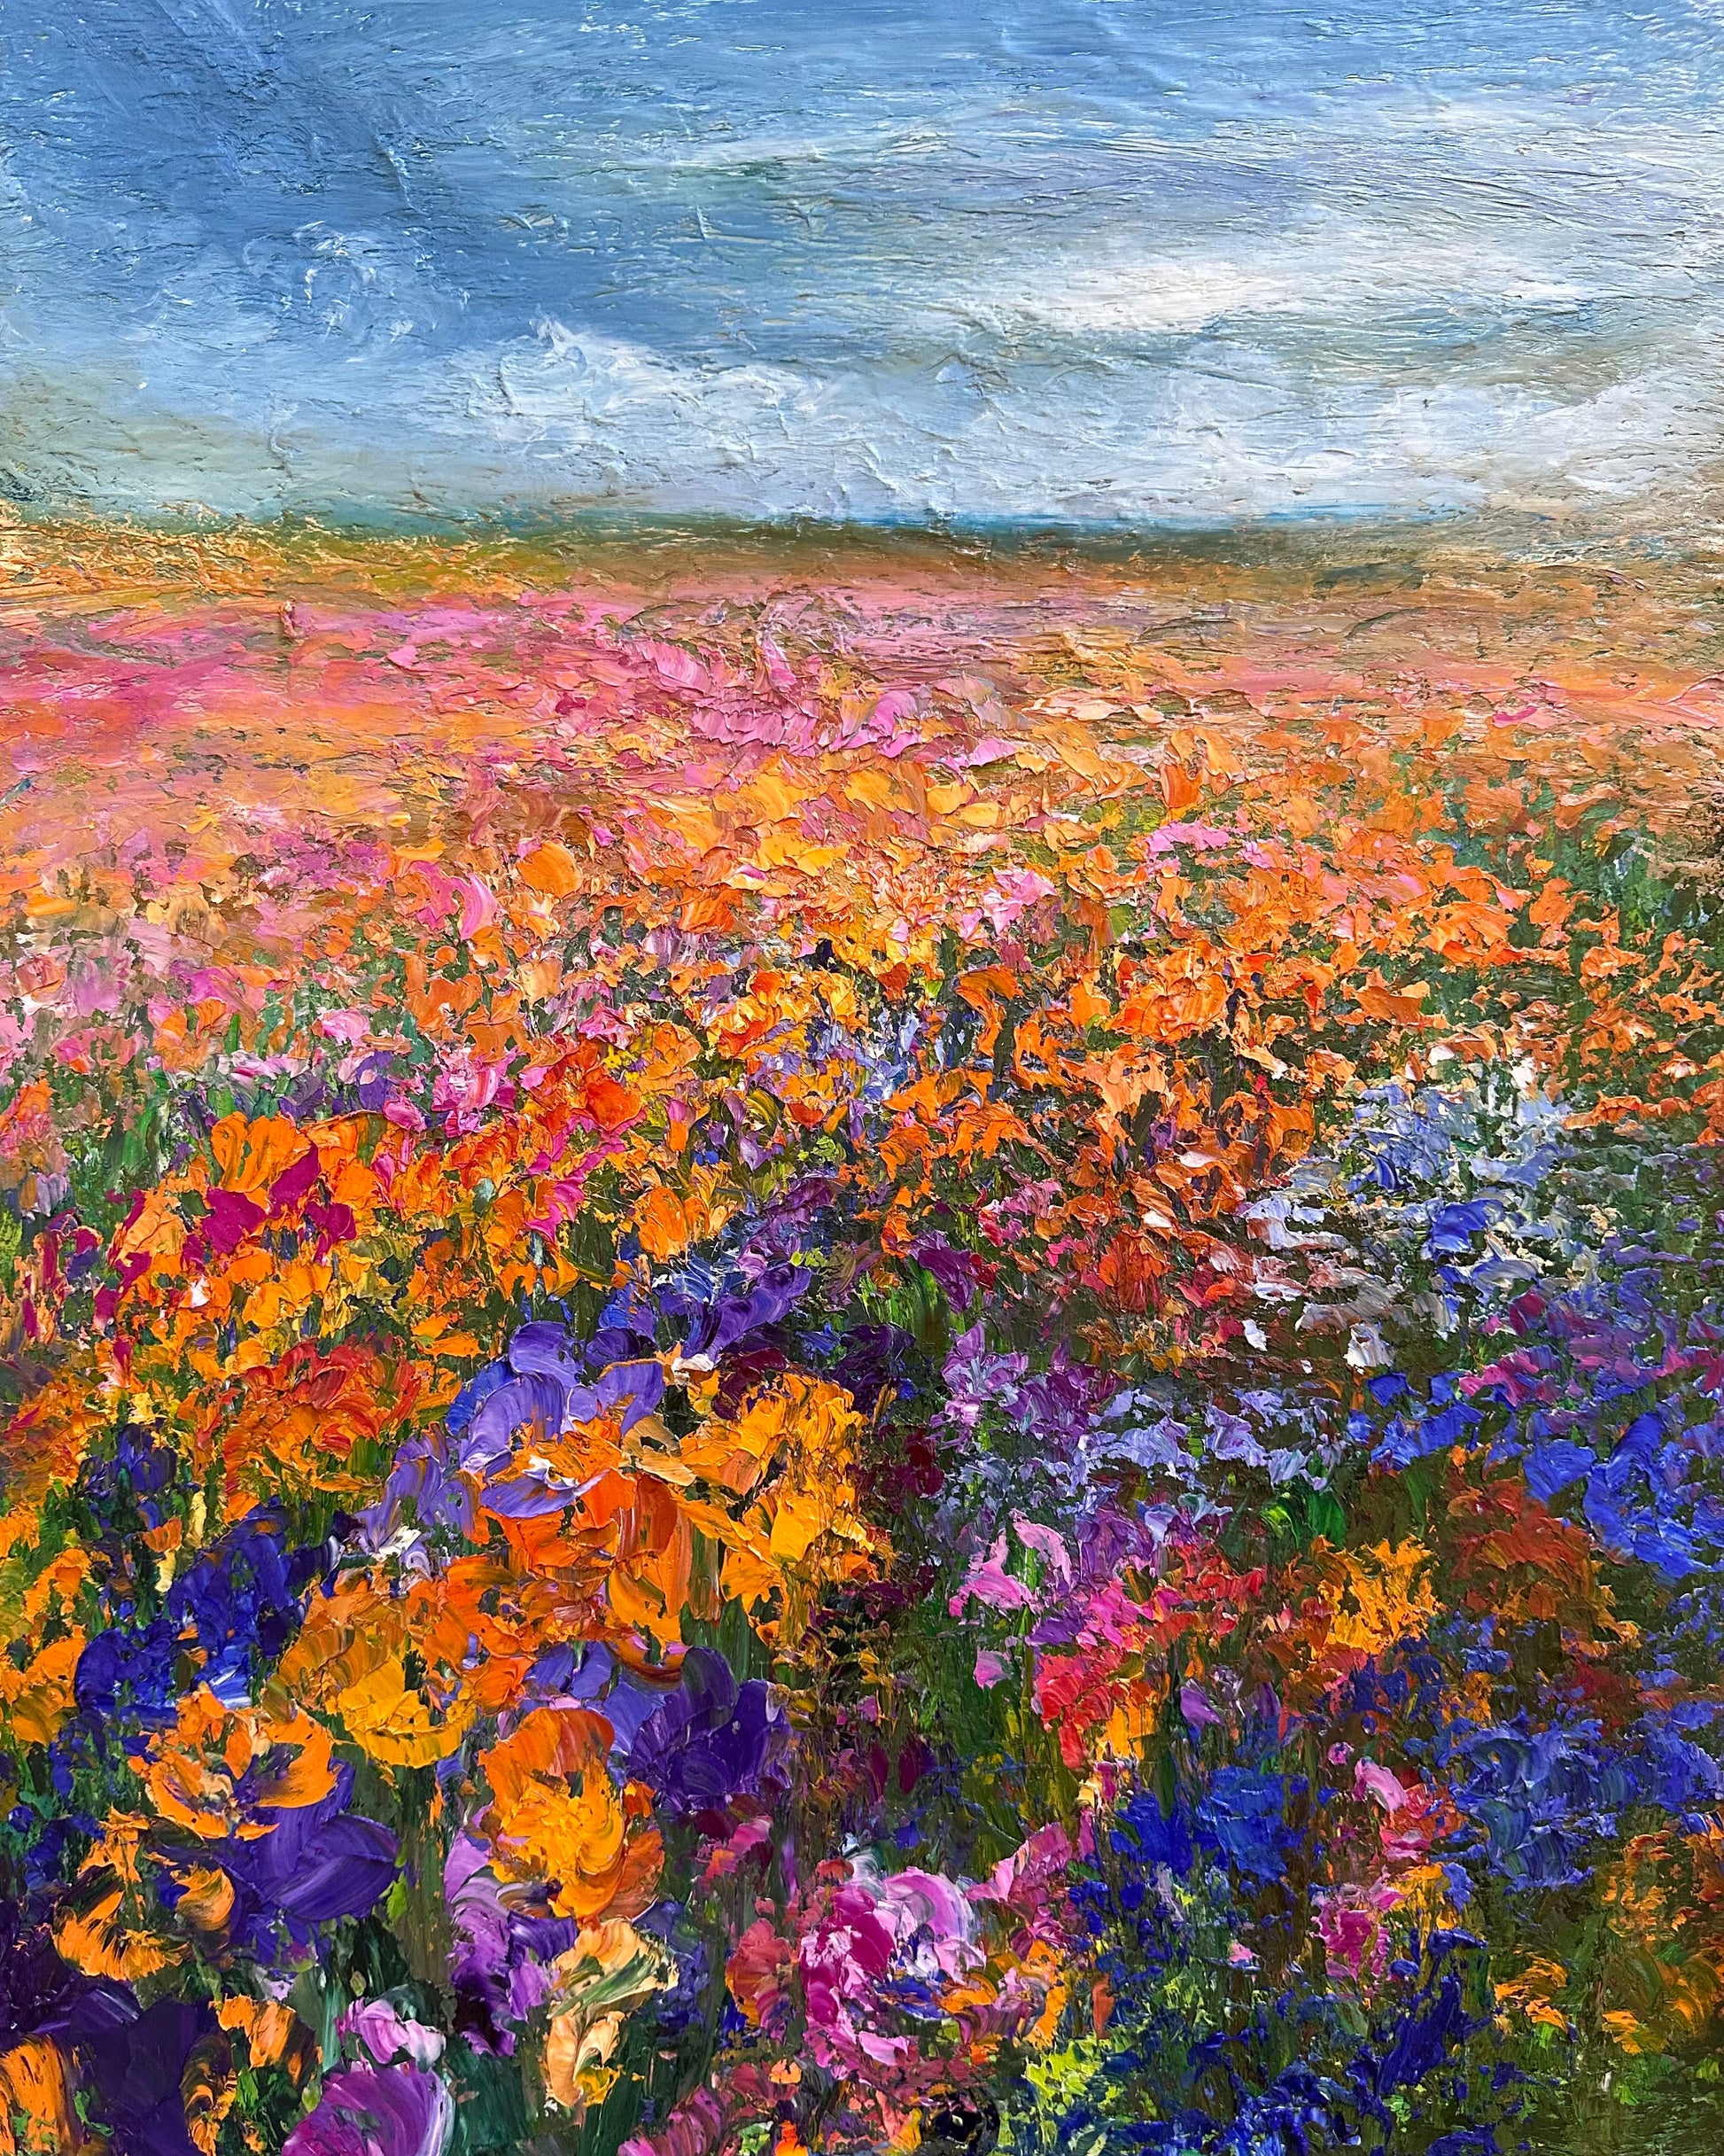 abstract oil painting of a flower field with a rainy sky with wild flowers in warm tones of oranges and pinks contrasting with blue and purple flowers.